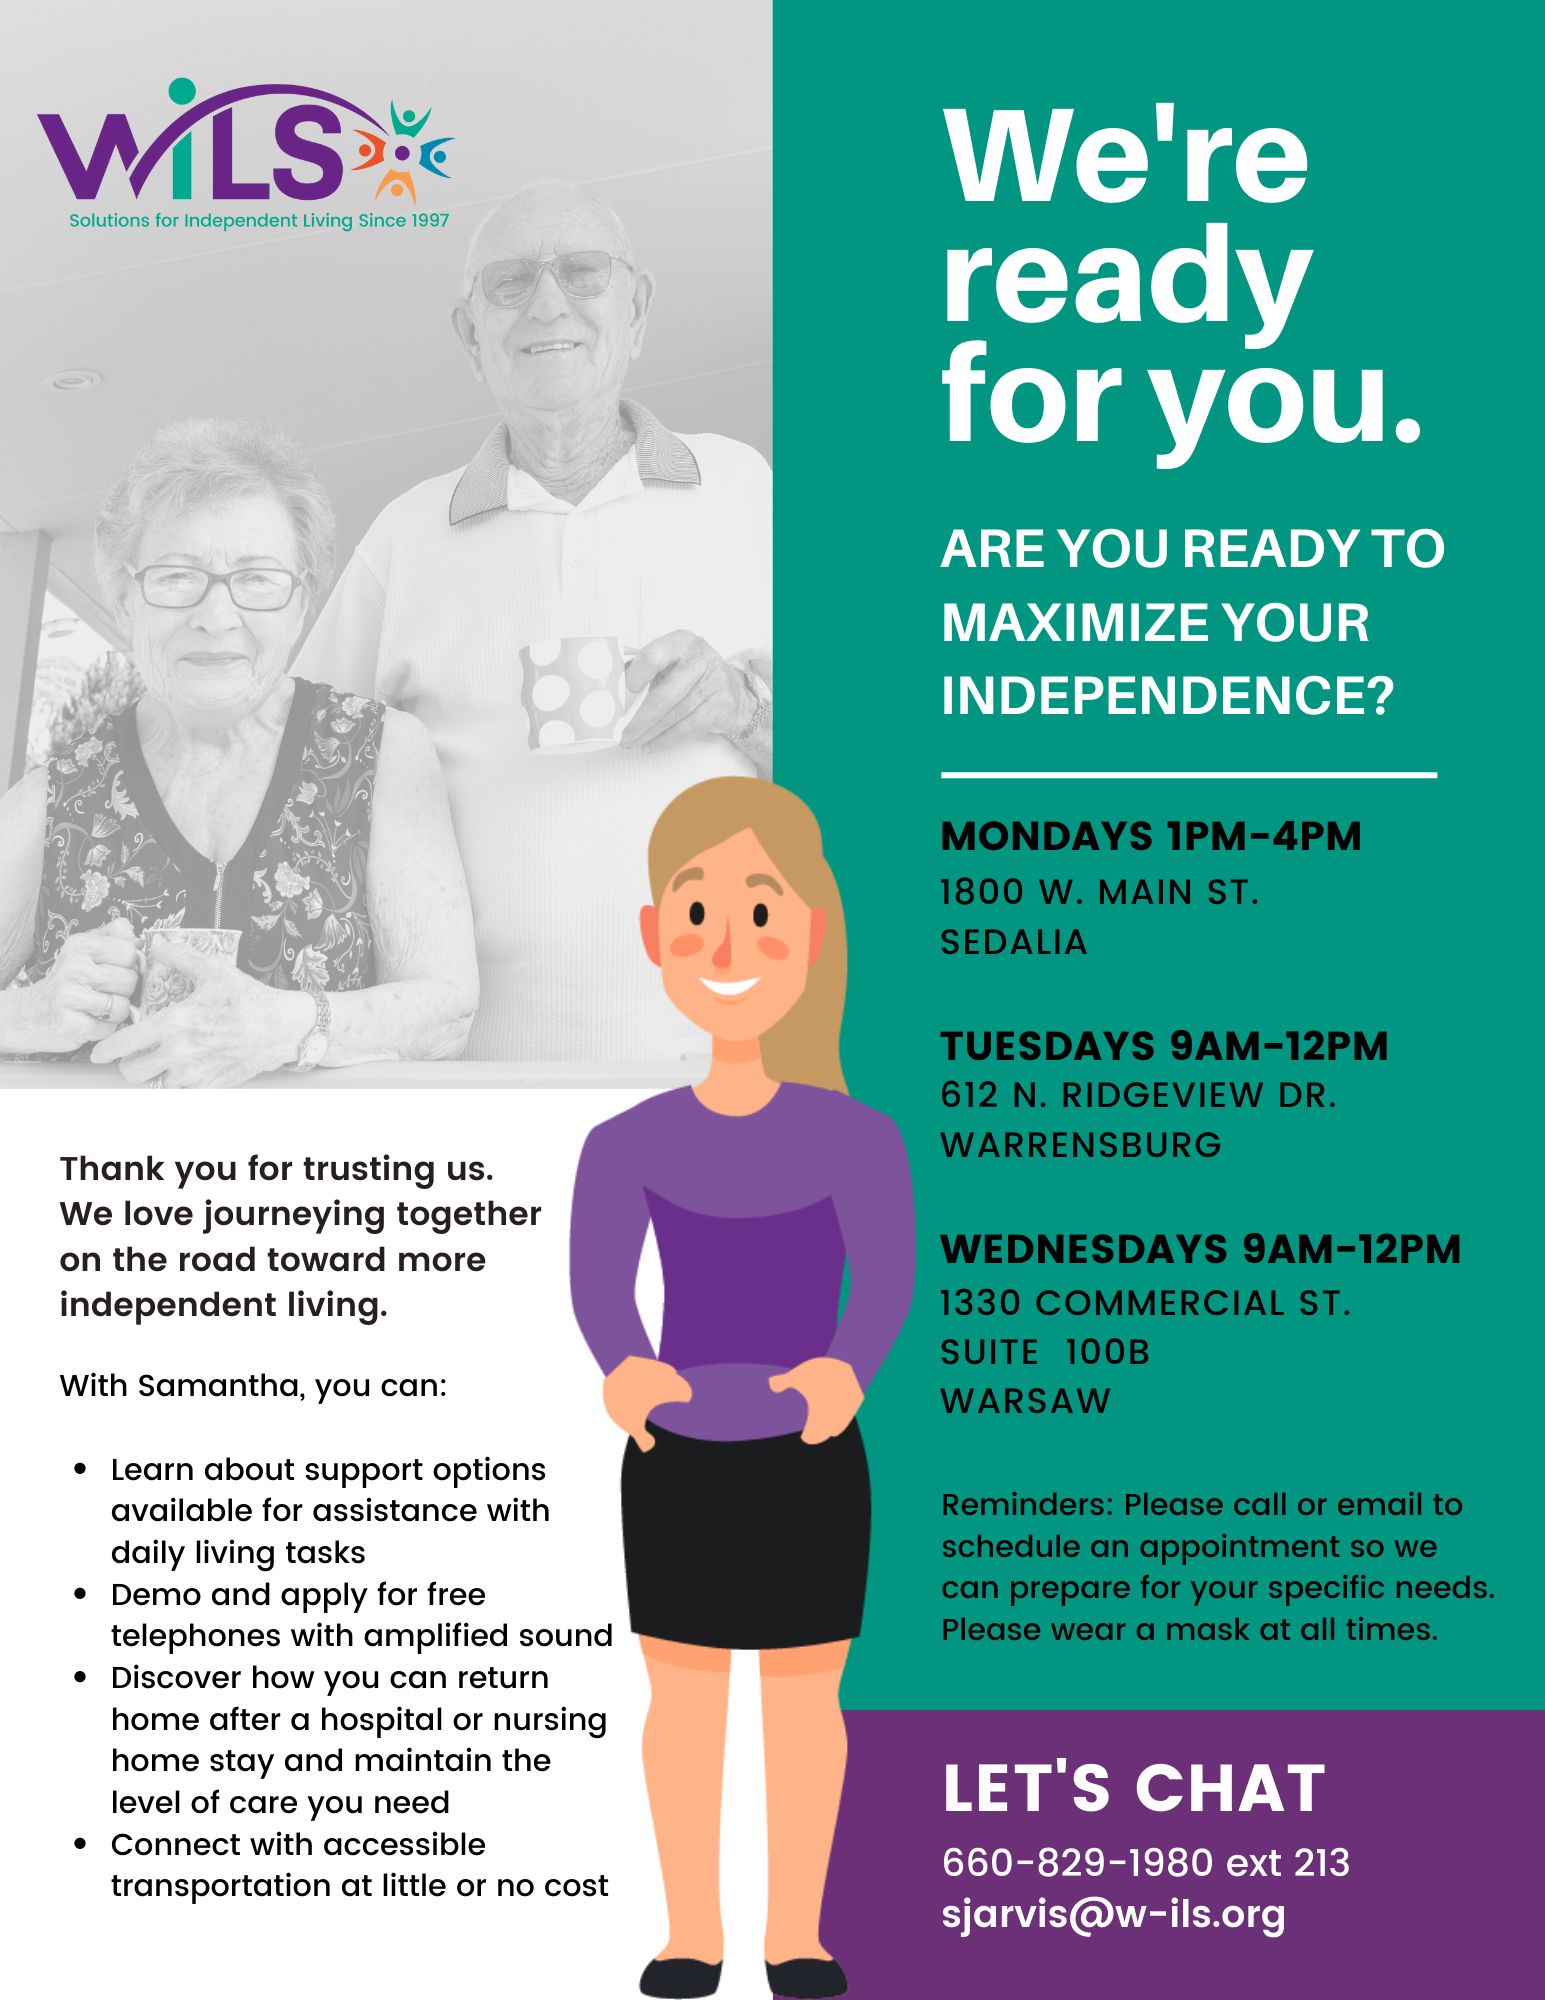 We're ready for you. Are you ready to maximize your independence? With Samantha, you can: Learn about support options available for assistance with daily living tasks Demo and apply for free telephones with amplified sound Discover how you can return home after a hospital or nursing home stay and maintain the level of care you need Connect with accessible transportation at little or no cost ?